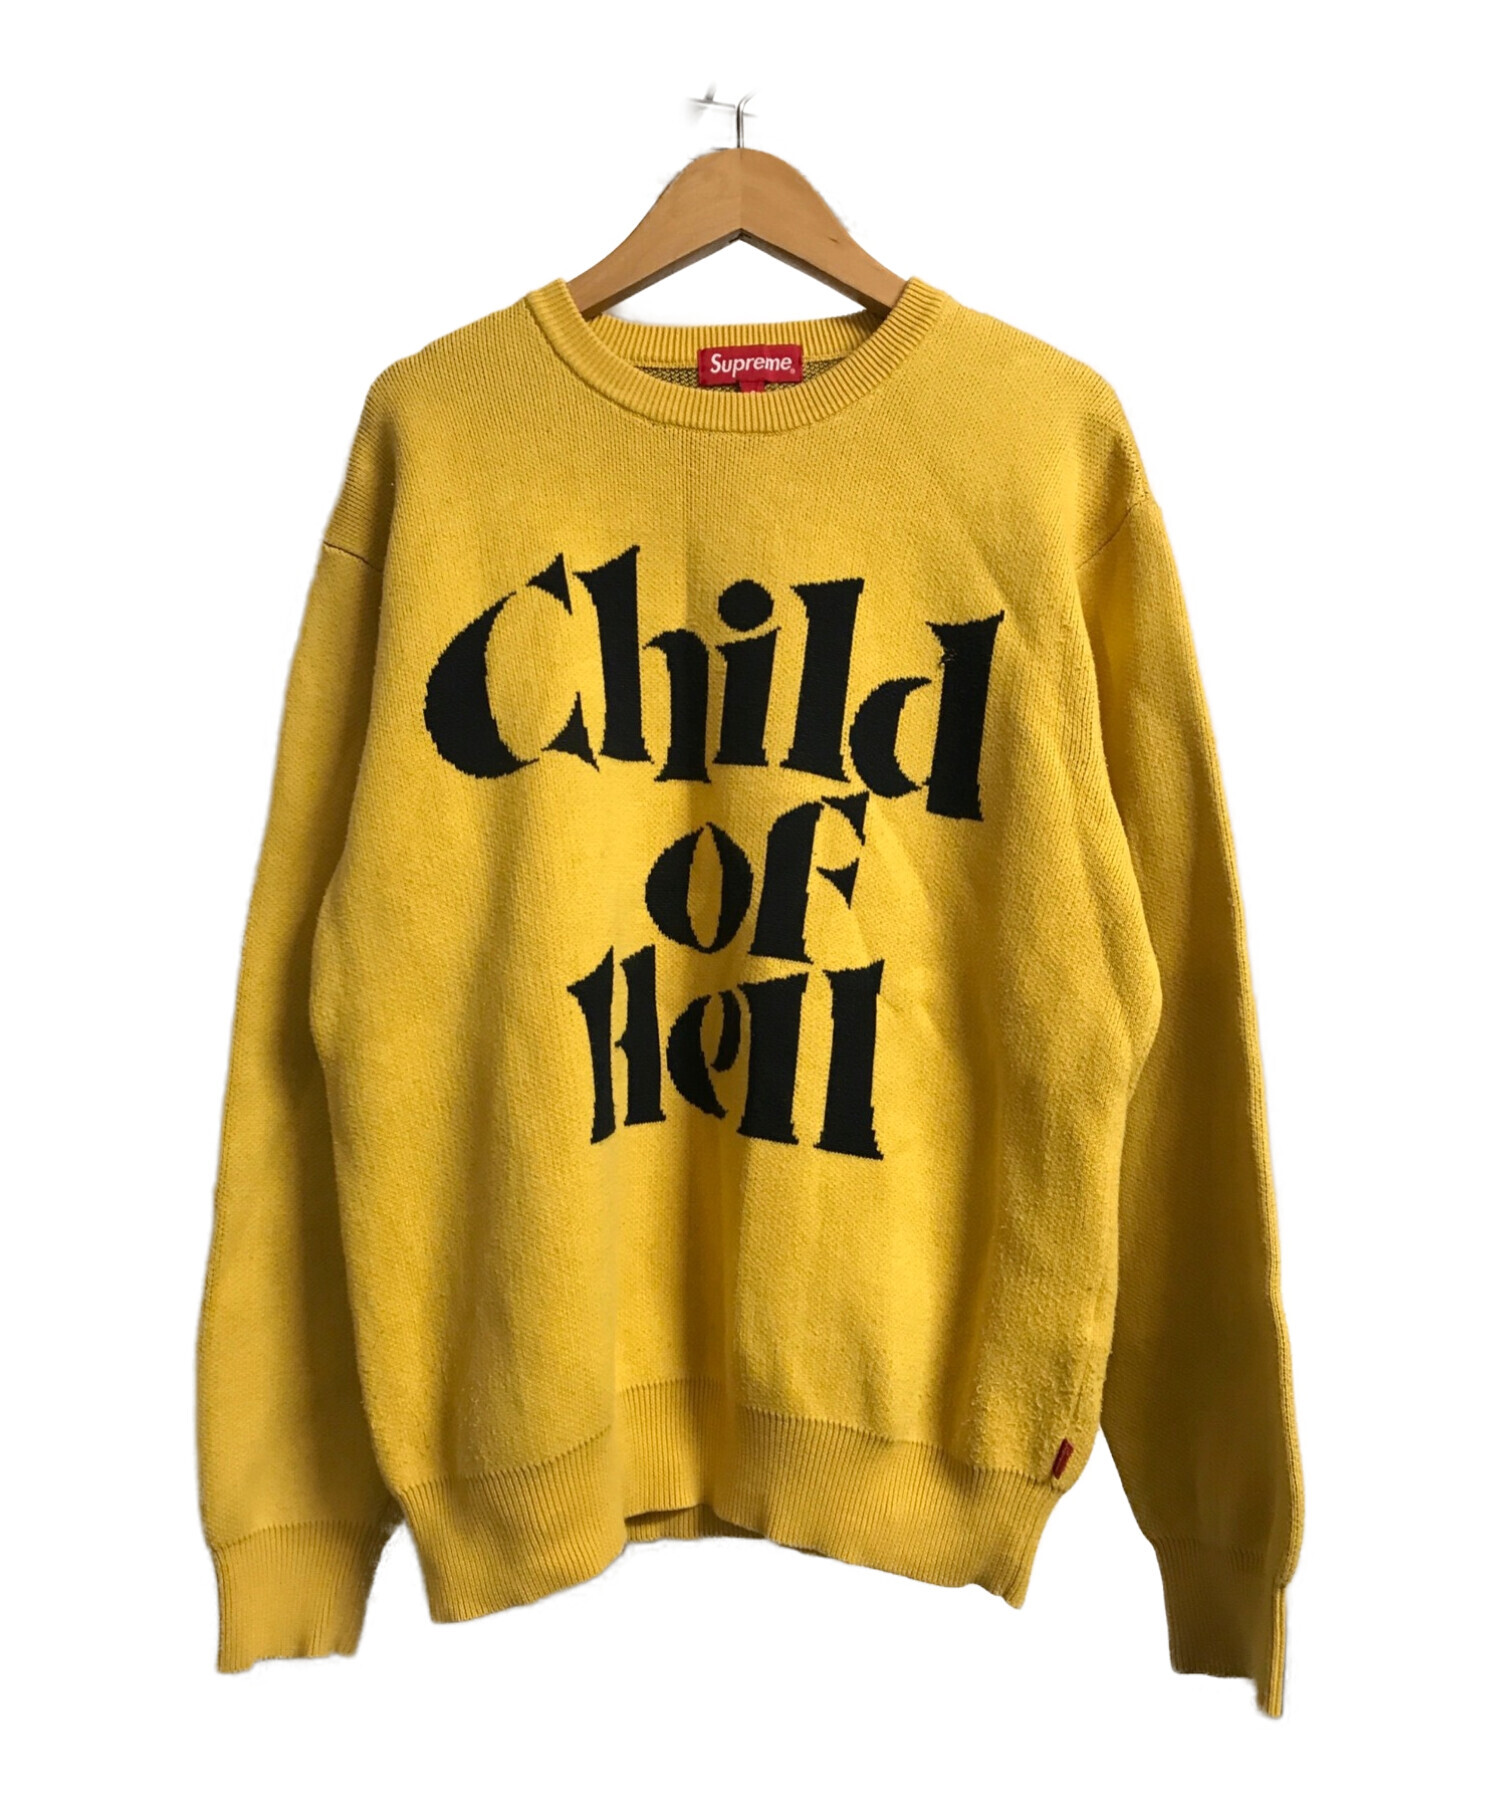 supreme child of hell sweater | www.jarussi.com.br